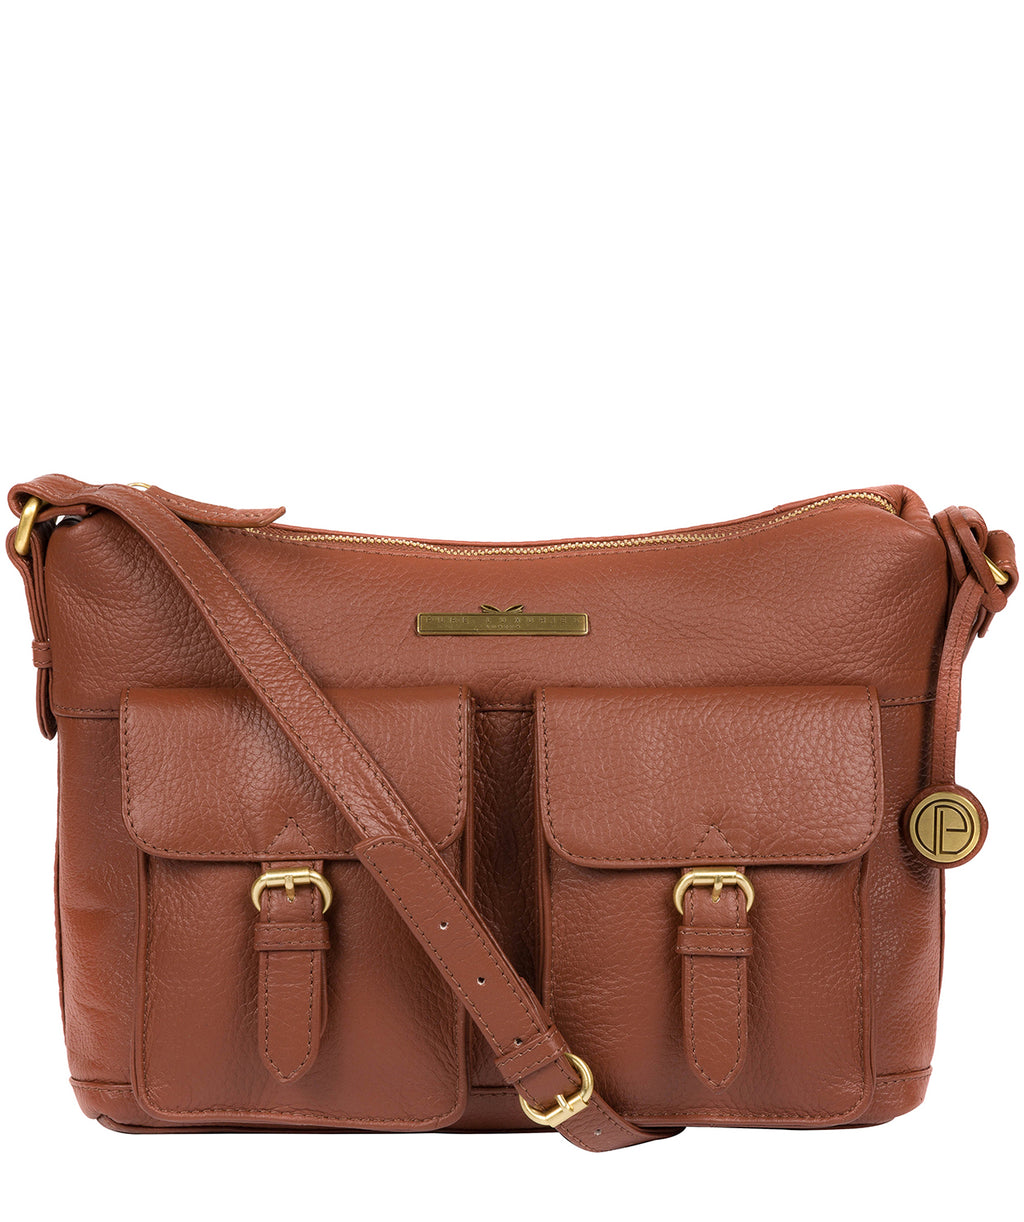 Tan Leather Shoulder Bag 'Natasha' by Pure Luxuries – Pure Luxuries London